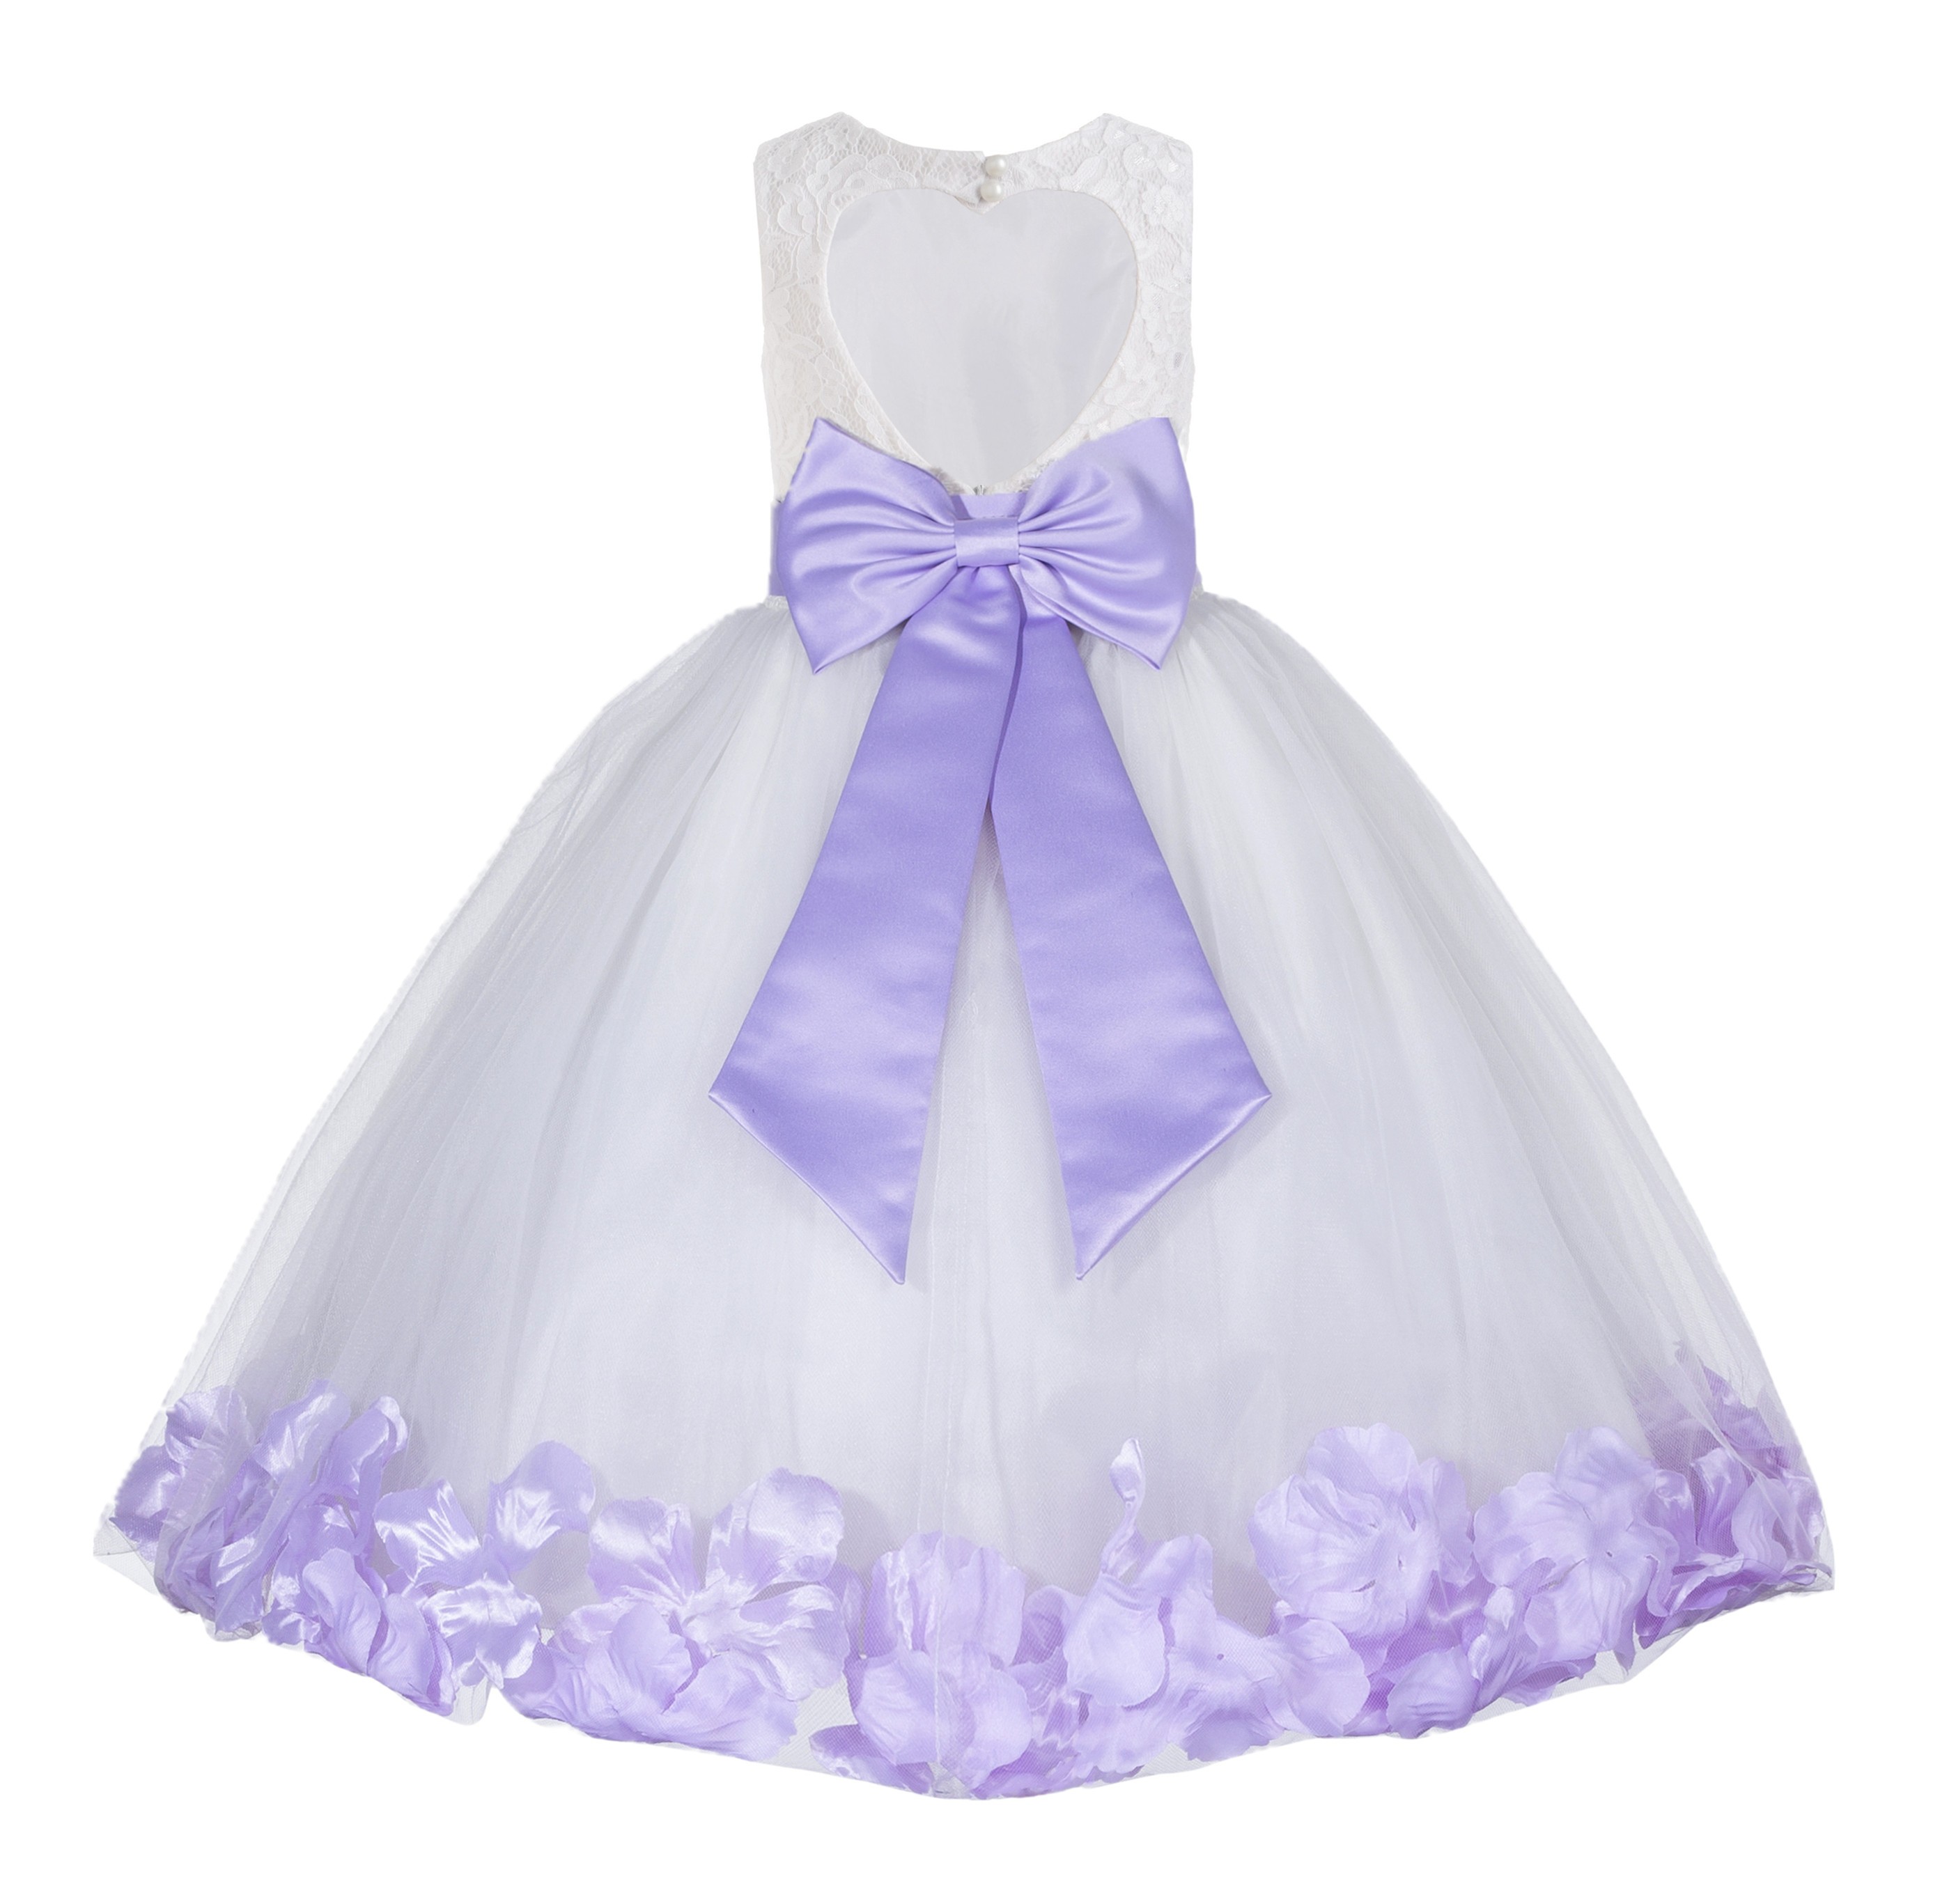 Ivory / Lilac Floral Lace Heart Cutout Flower Girl Dress with Petals 185T